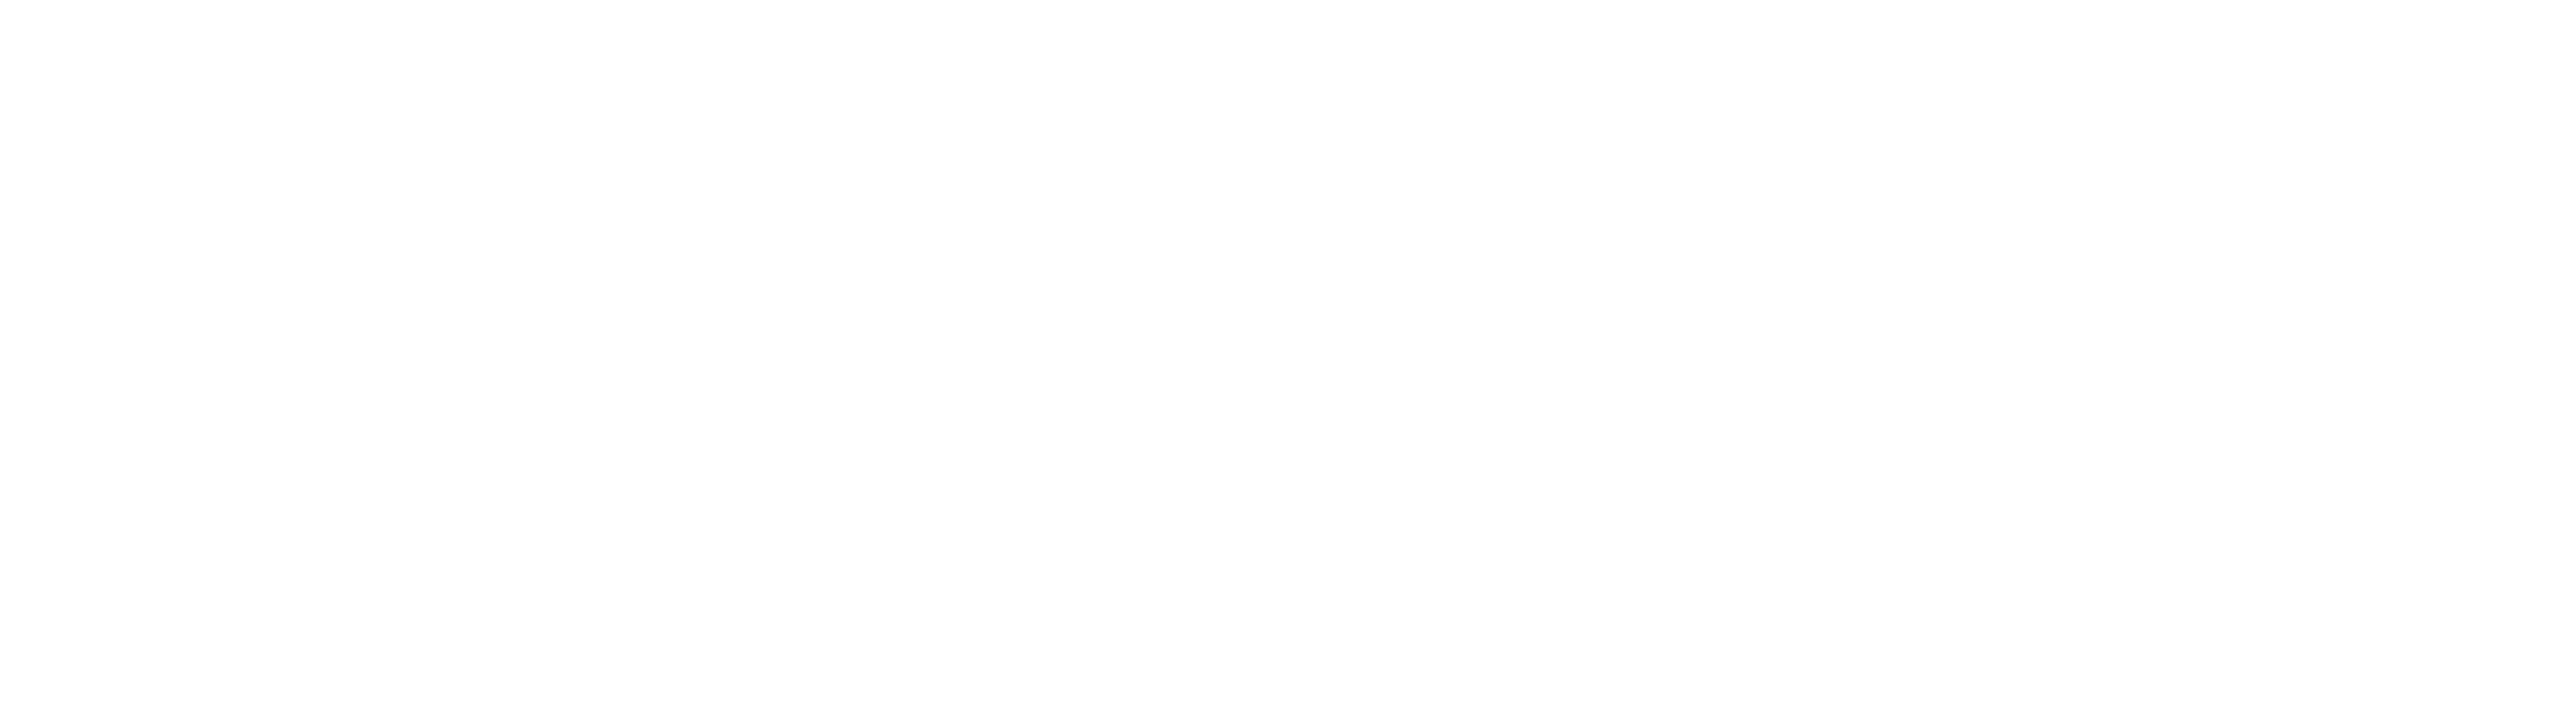 Flash Savings Event - Limited Homes. Limited Time!